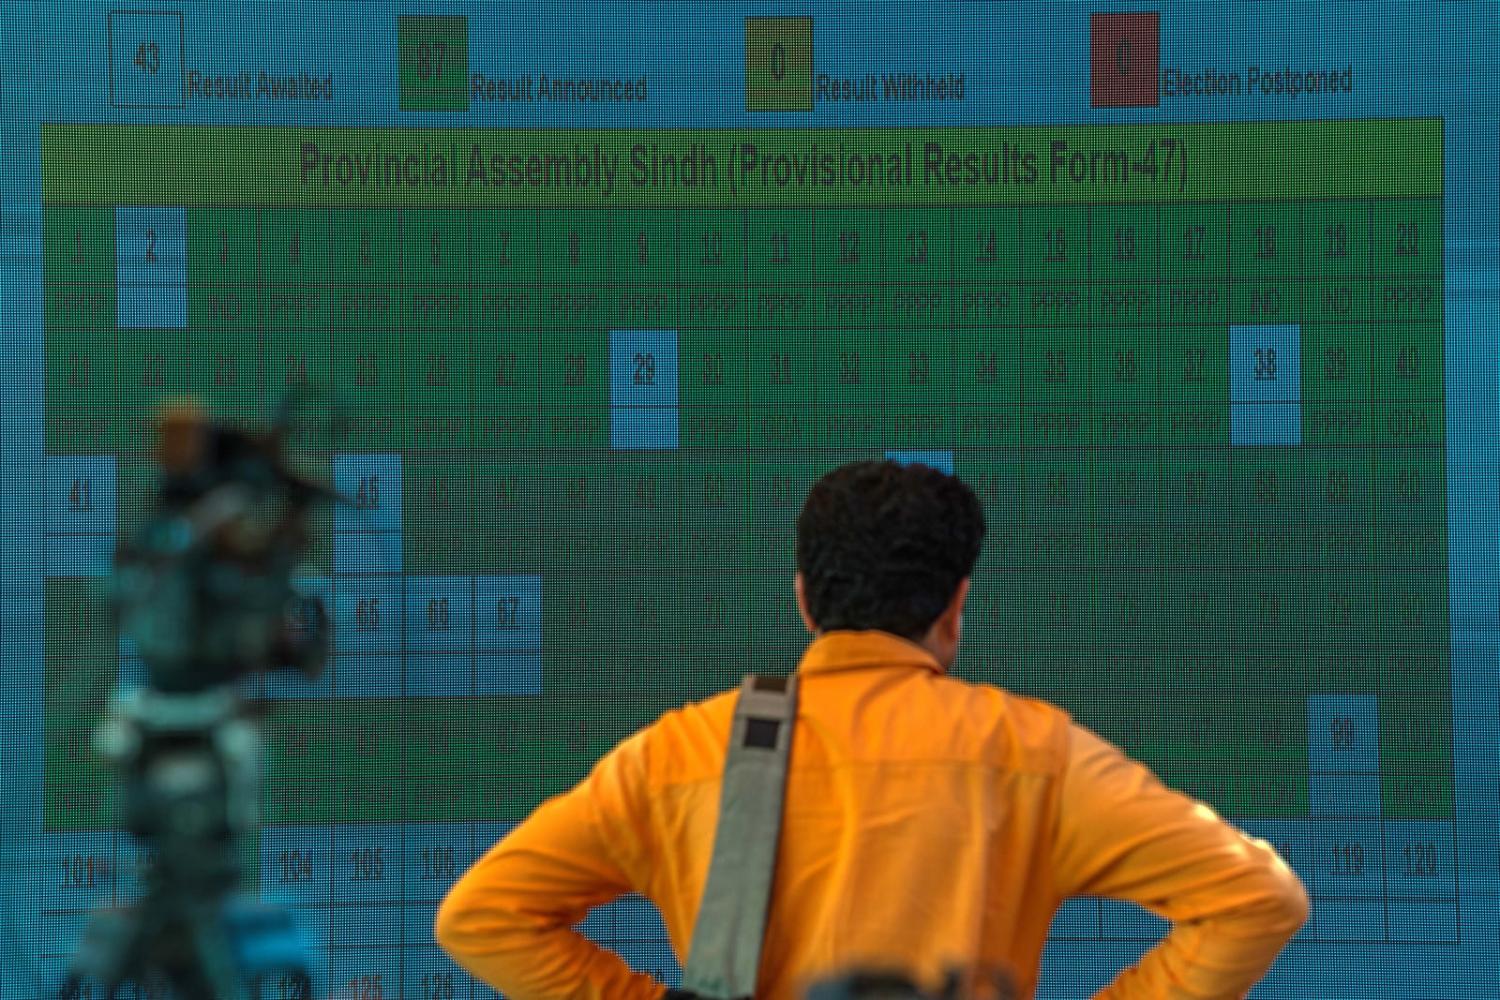 Live election results in Karachi (Hafeez/Bloomberg via Getty Images)